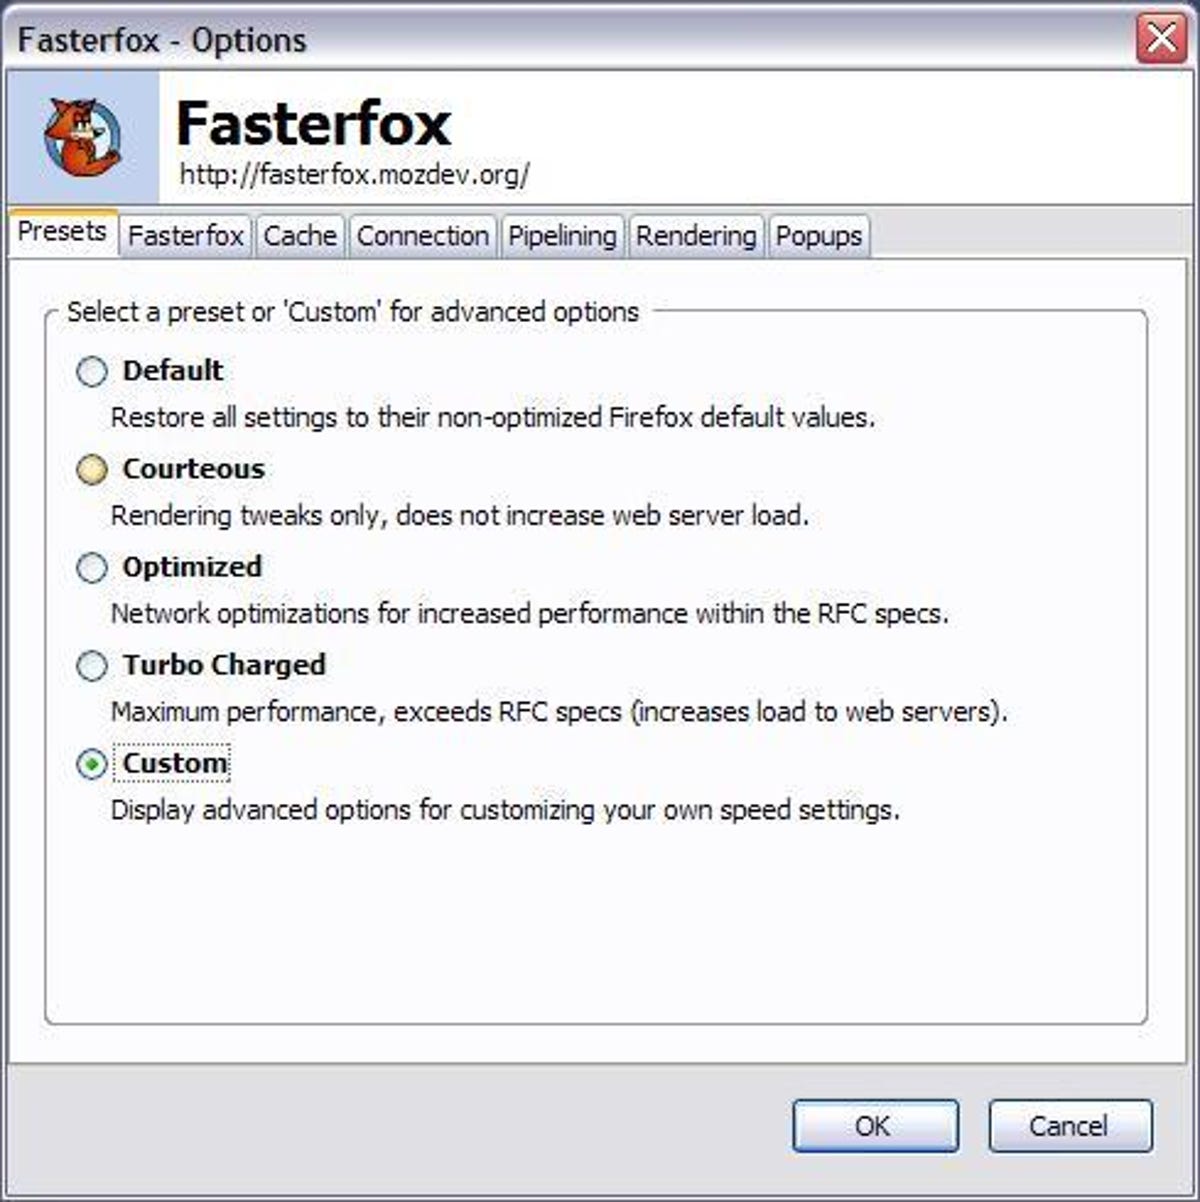 The Options dialog in the Fasterfox add-in for the Firefox browser